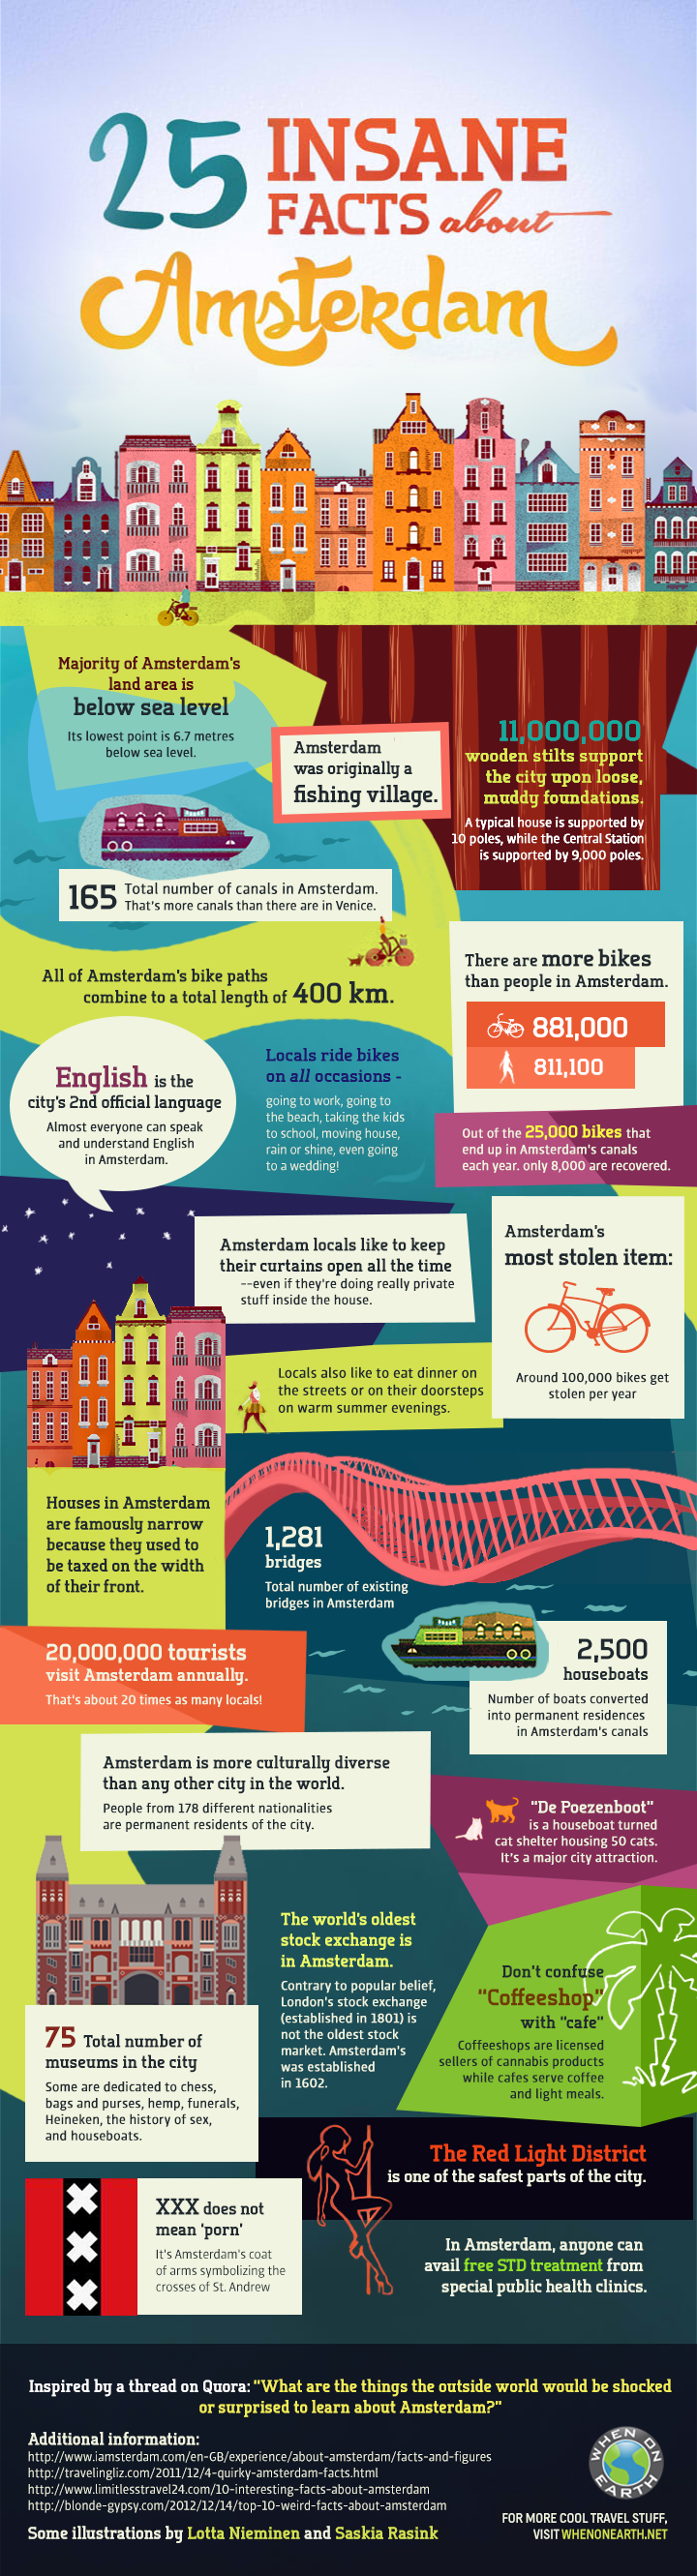 25 Insane Facts About Amsterdam #infographic